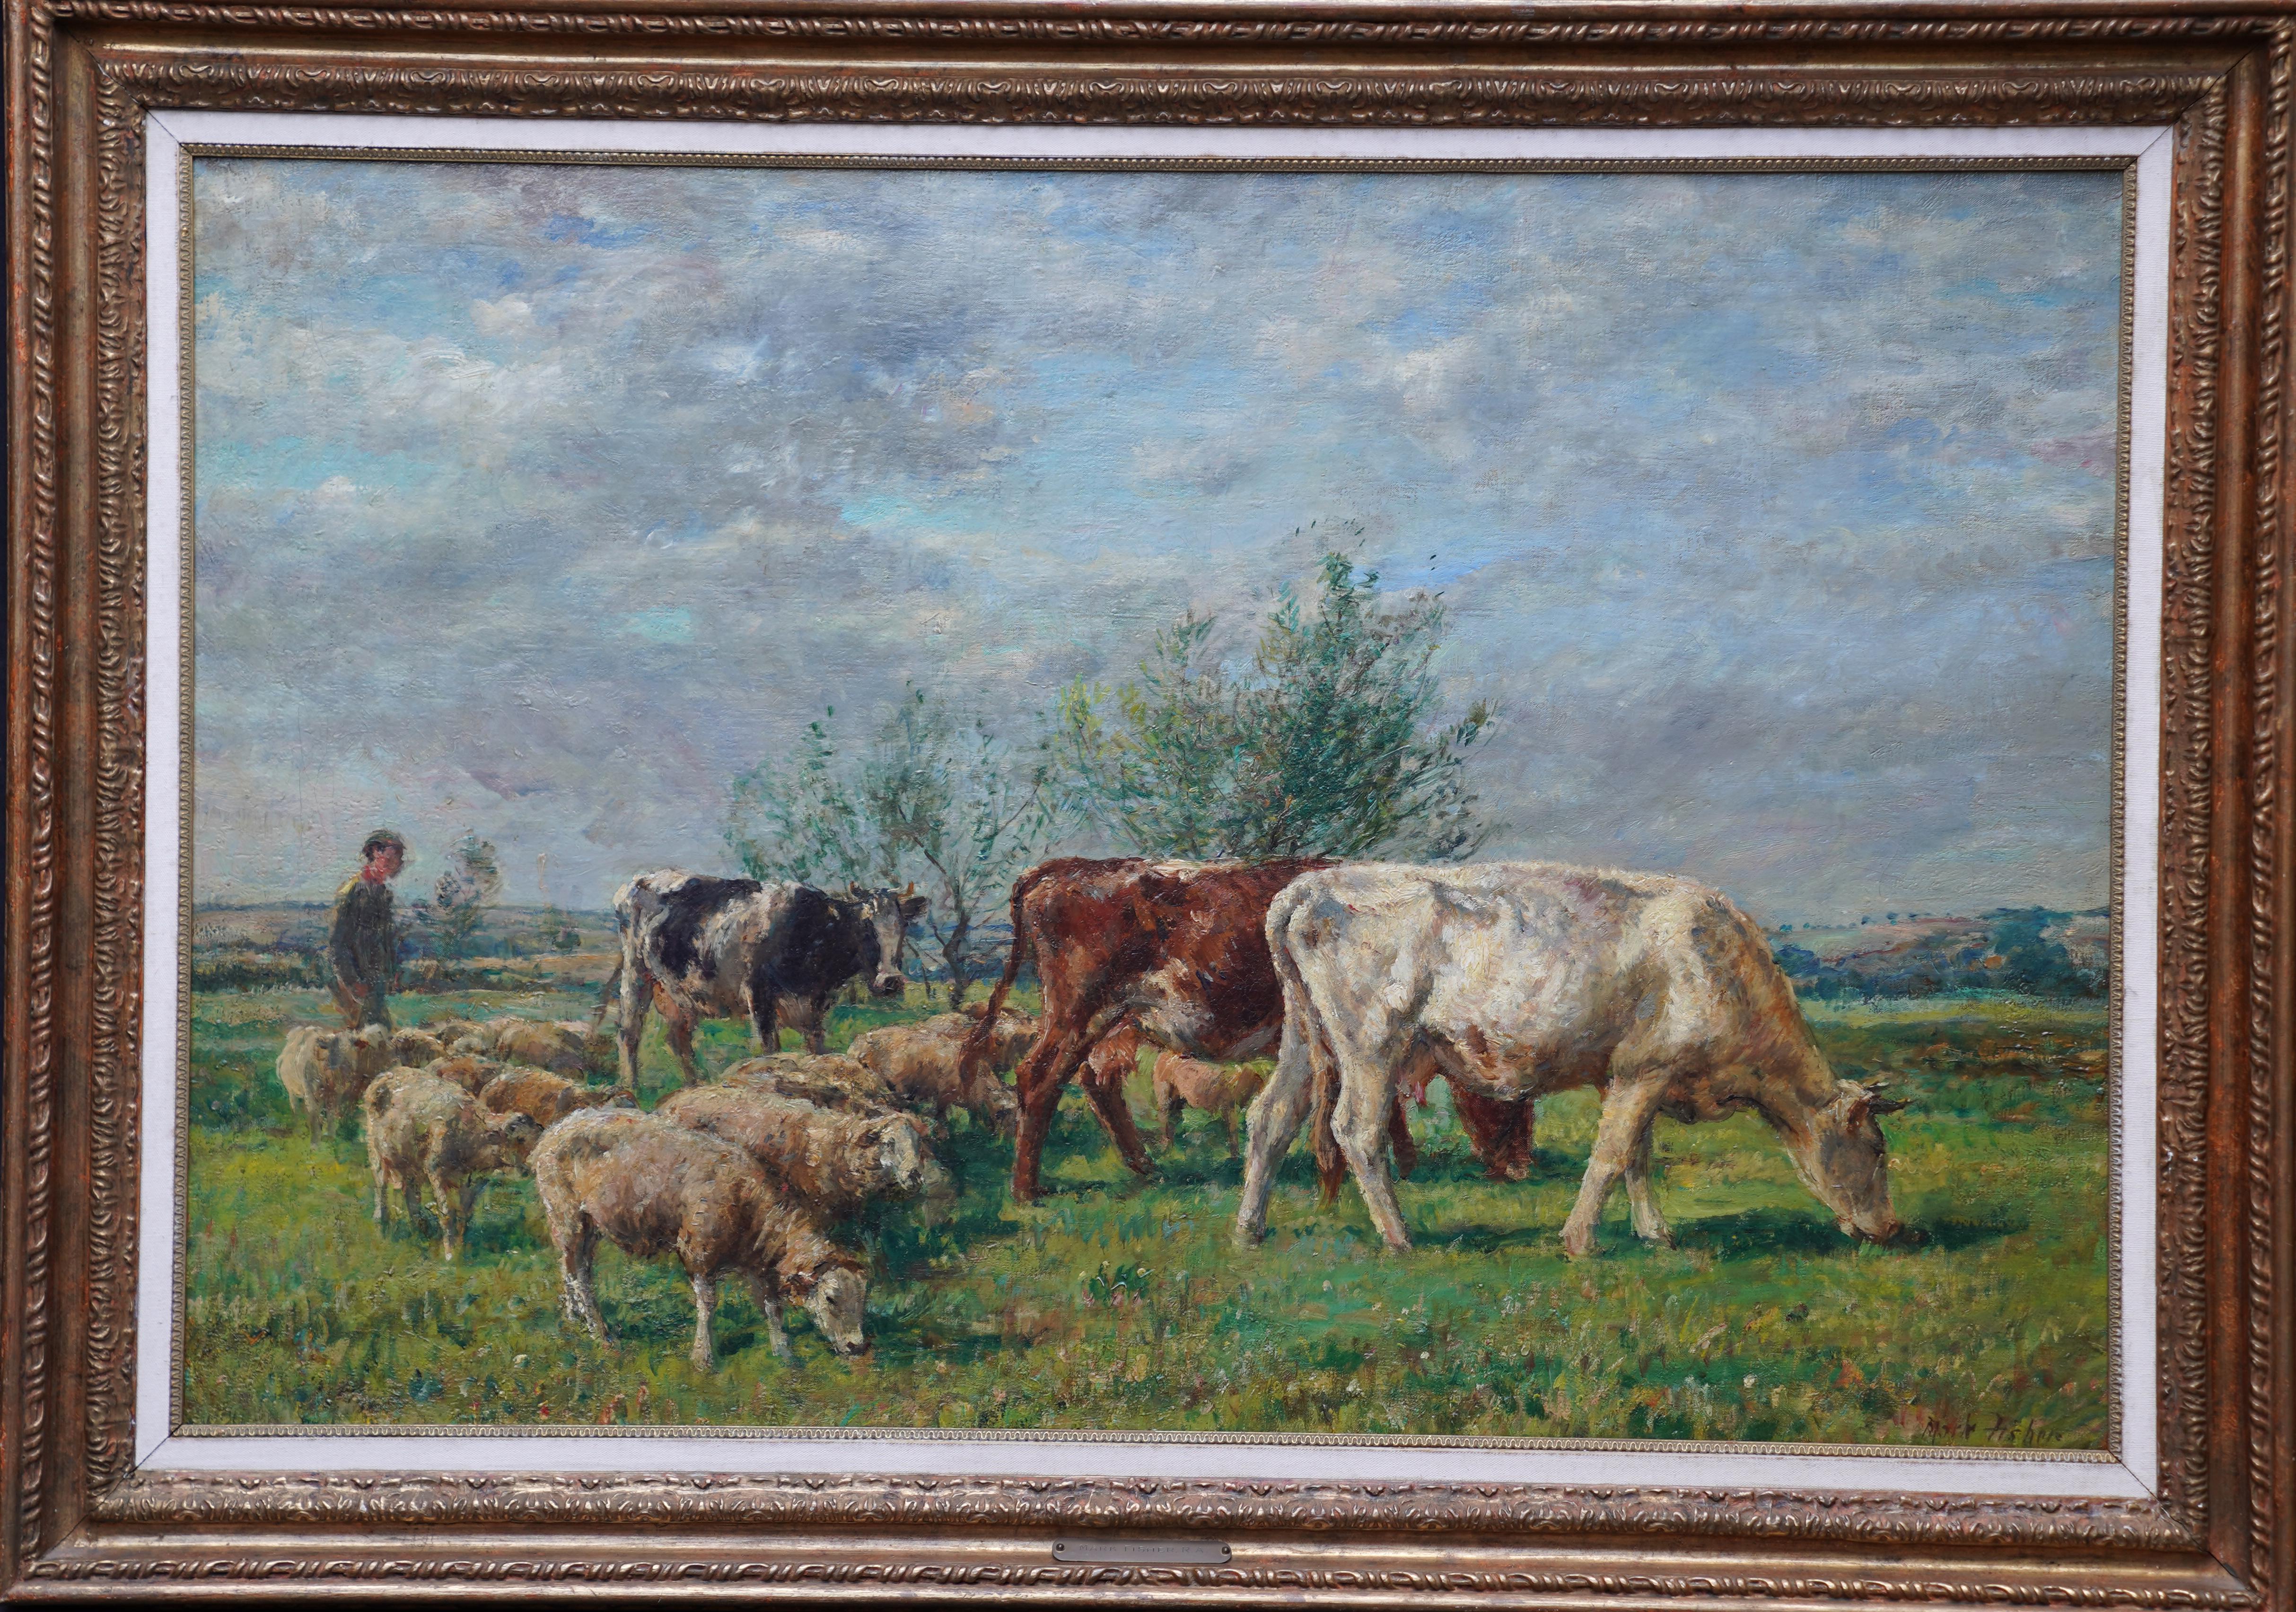 William Mark Fisher Animal Painting - Landscape with Cattle and Sheep - British Victorian art Pastoral oil painting